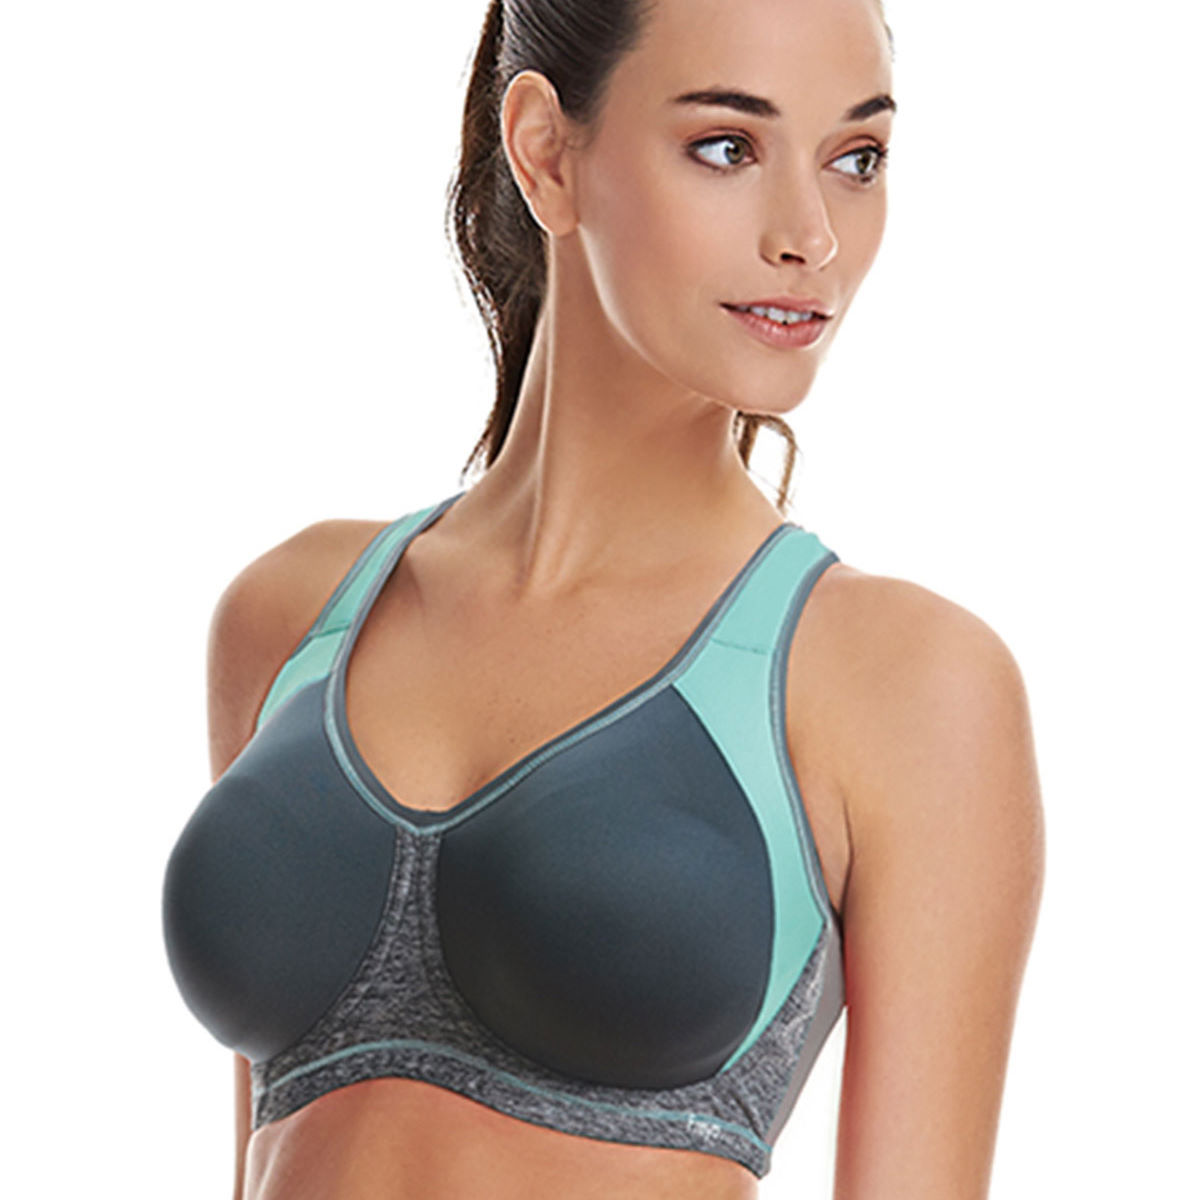 Here's How to Get the Best Sports Bra After Breast Augmentation